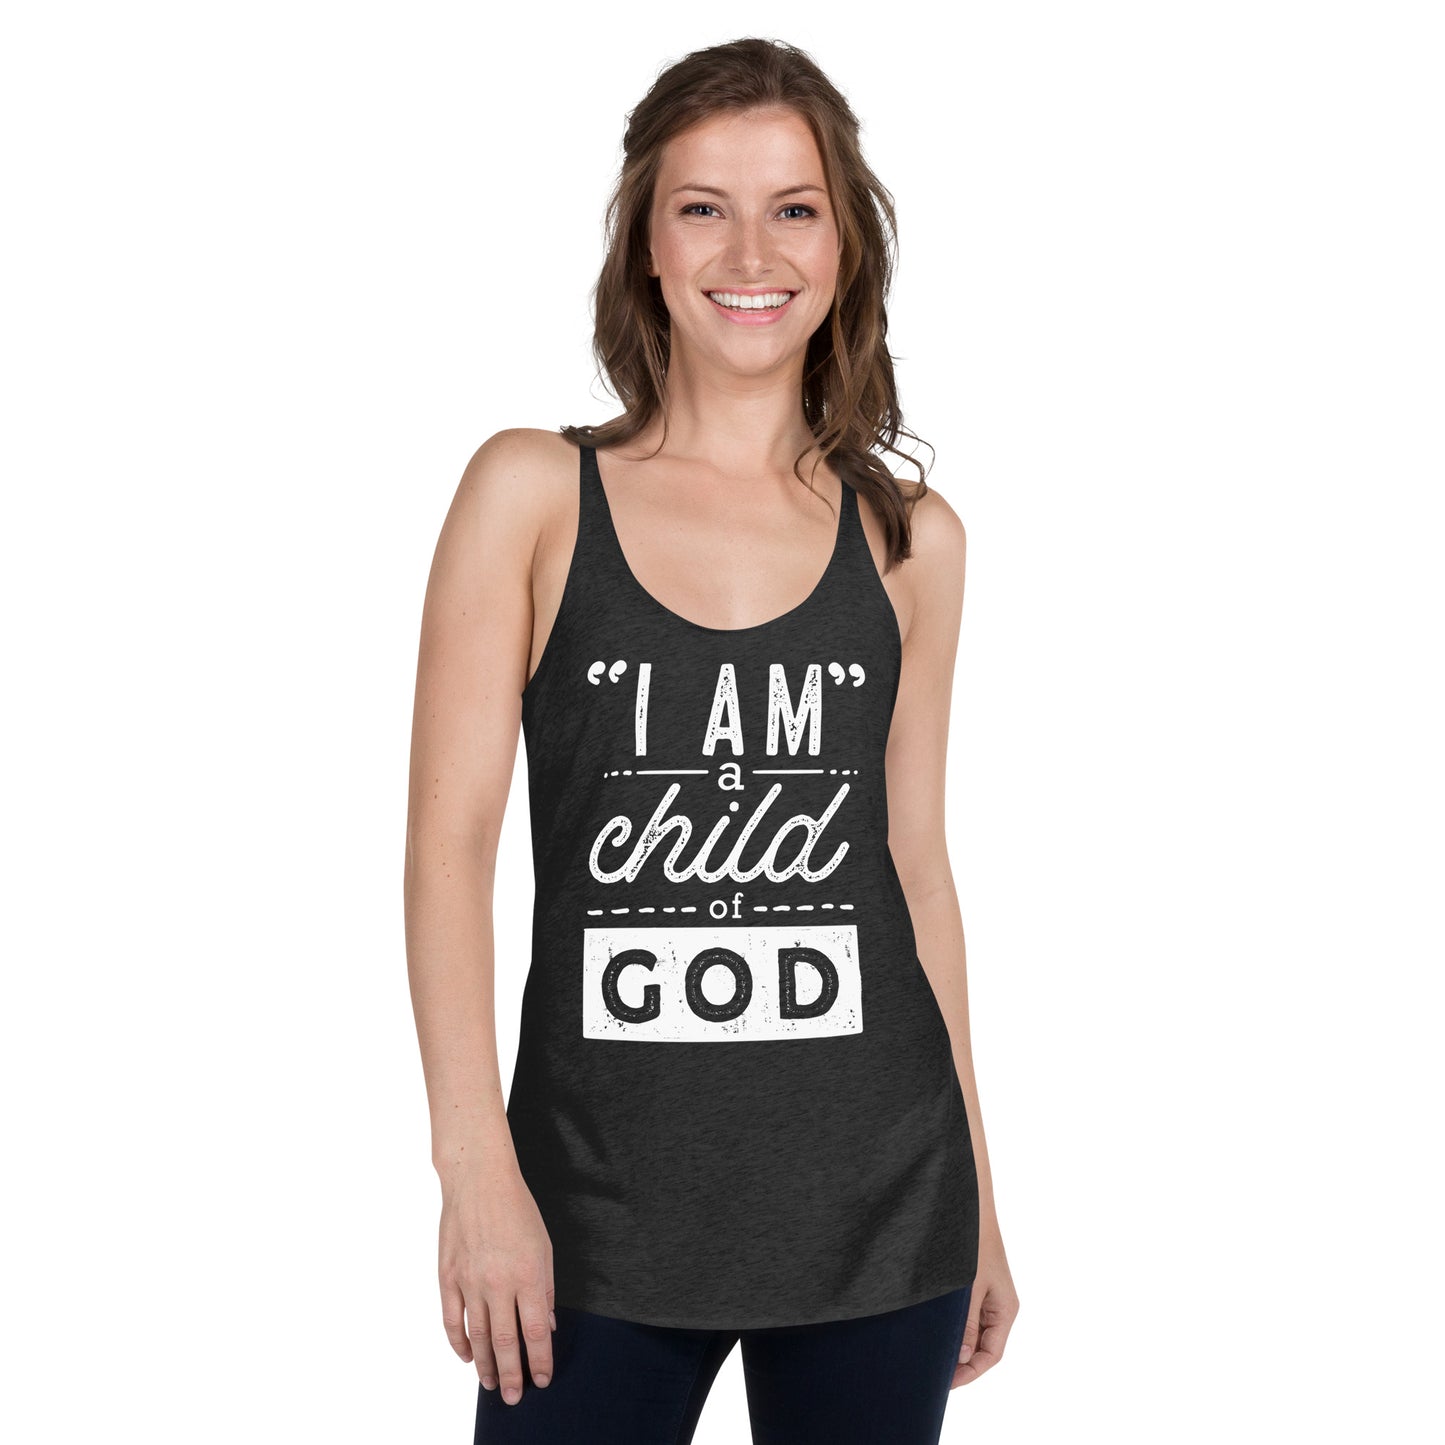 I Am a Child of God Women's Colored Racerback Tank